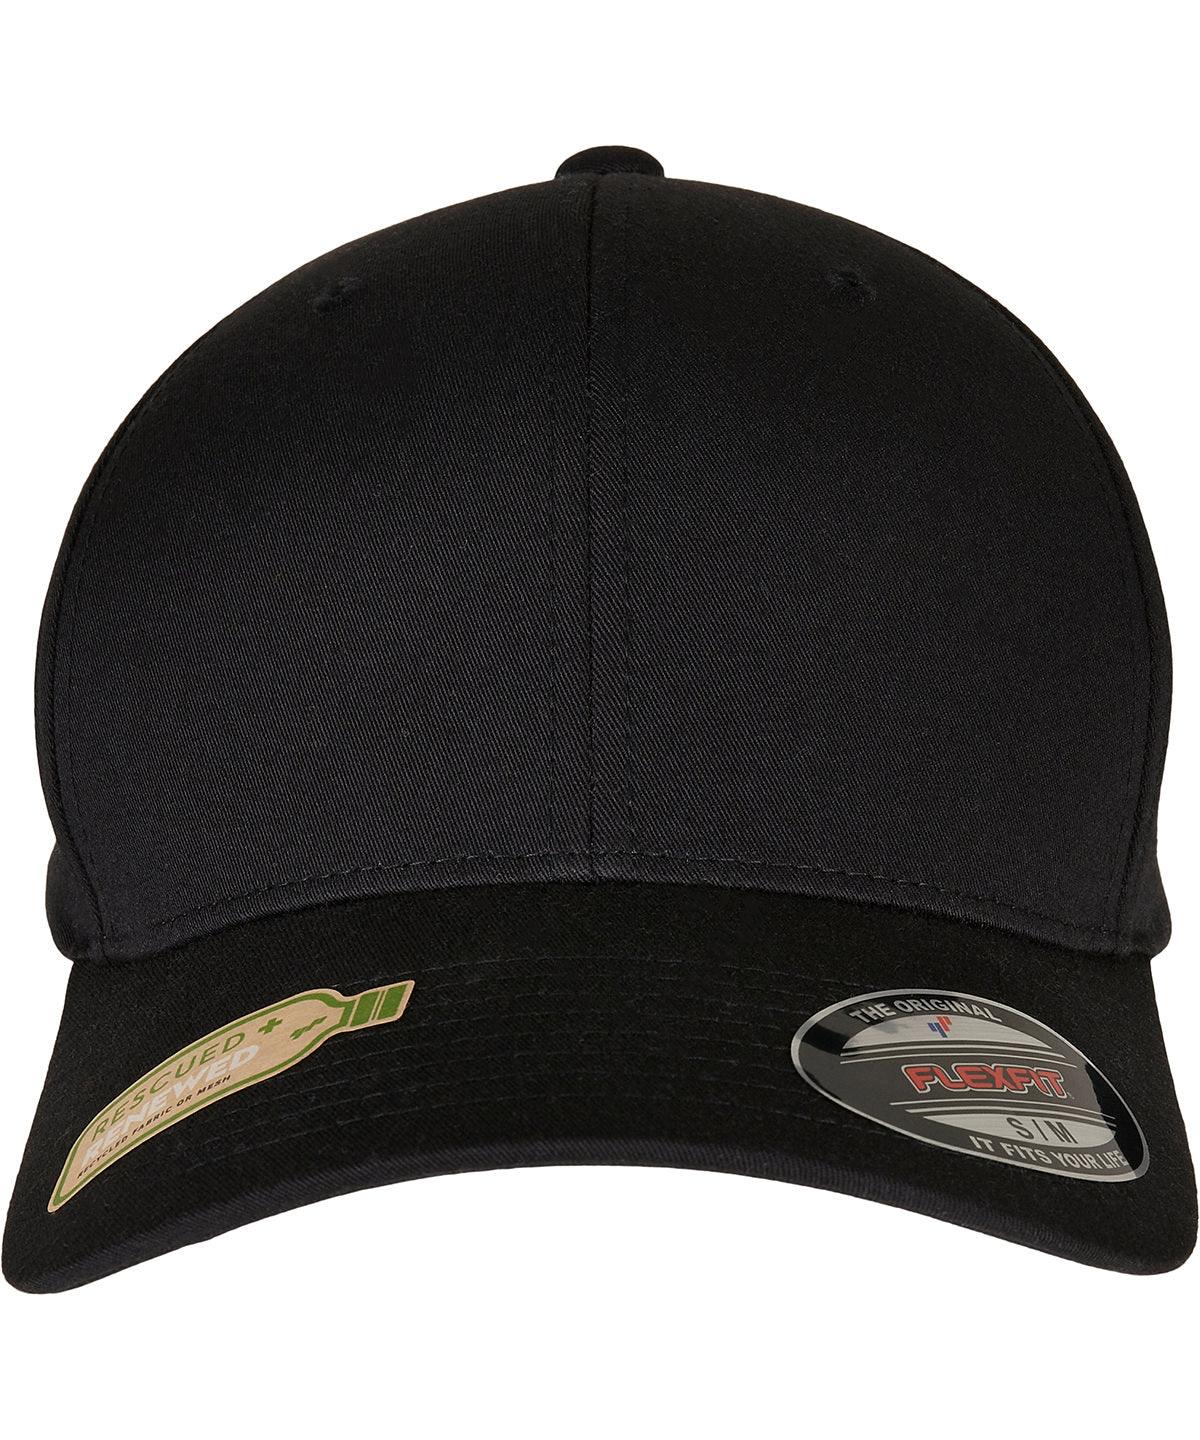 Silver - Flexfit recycled polyester Yupoong Conscious For Flexfit by 2022Next Styles HeadwearNew cap & GenOrganic